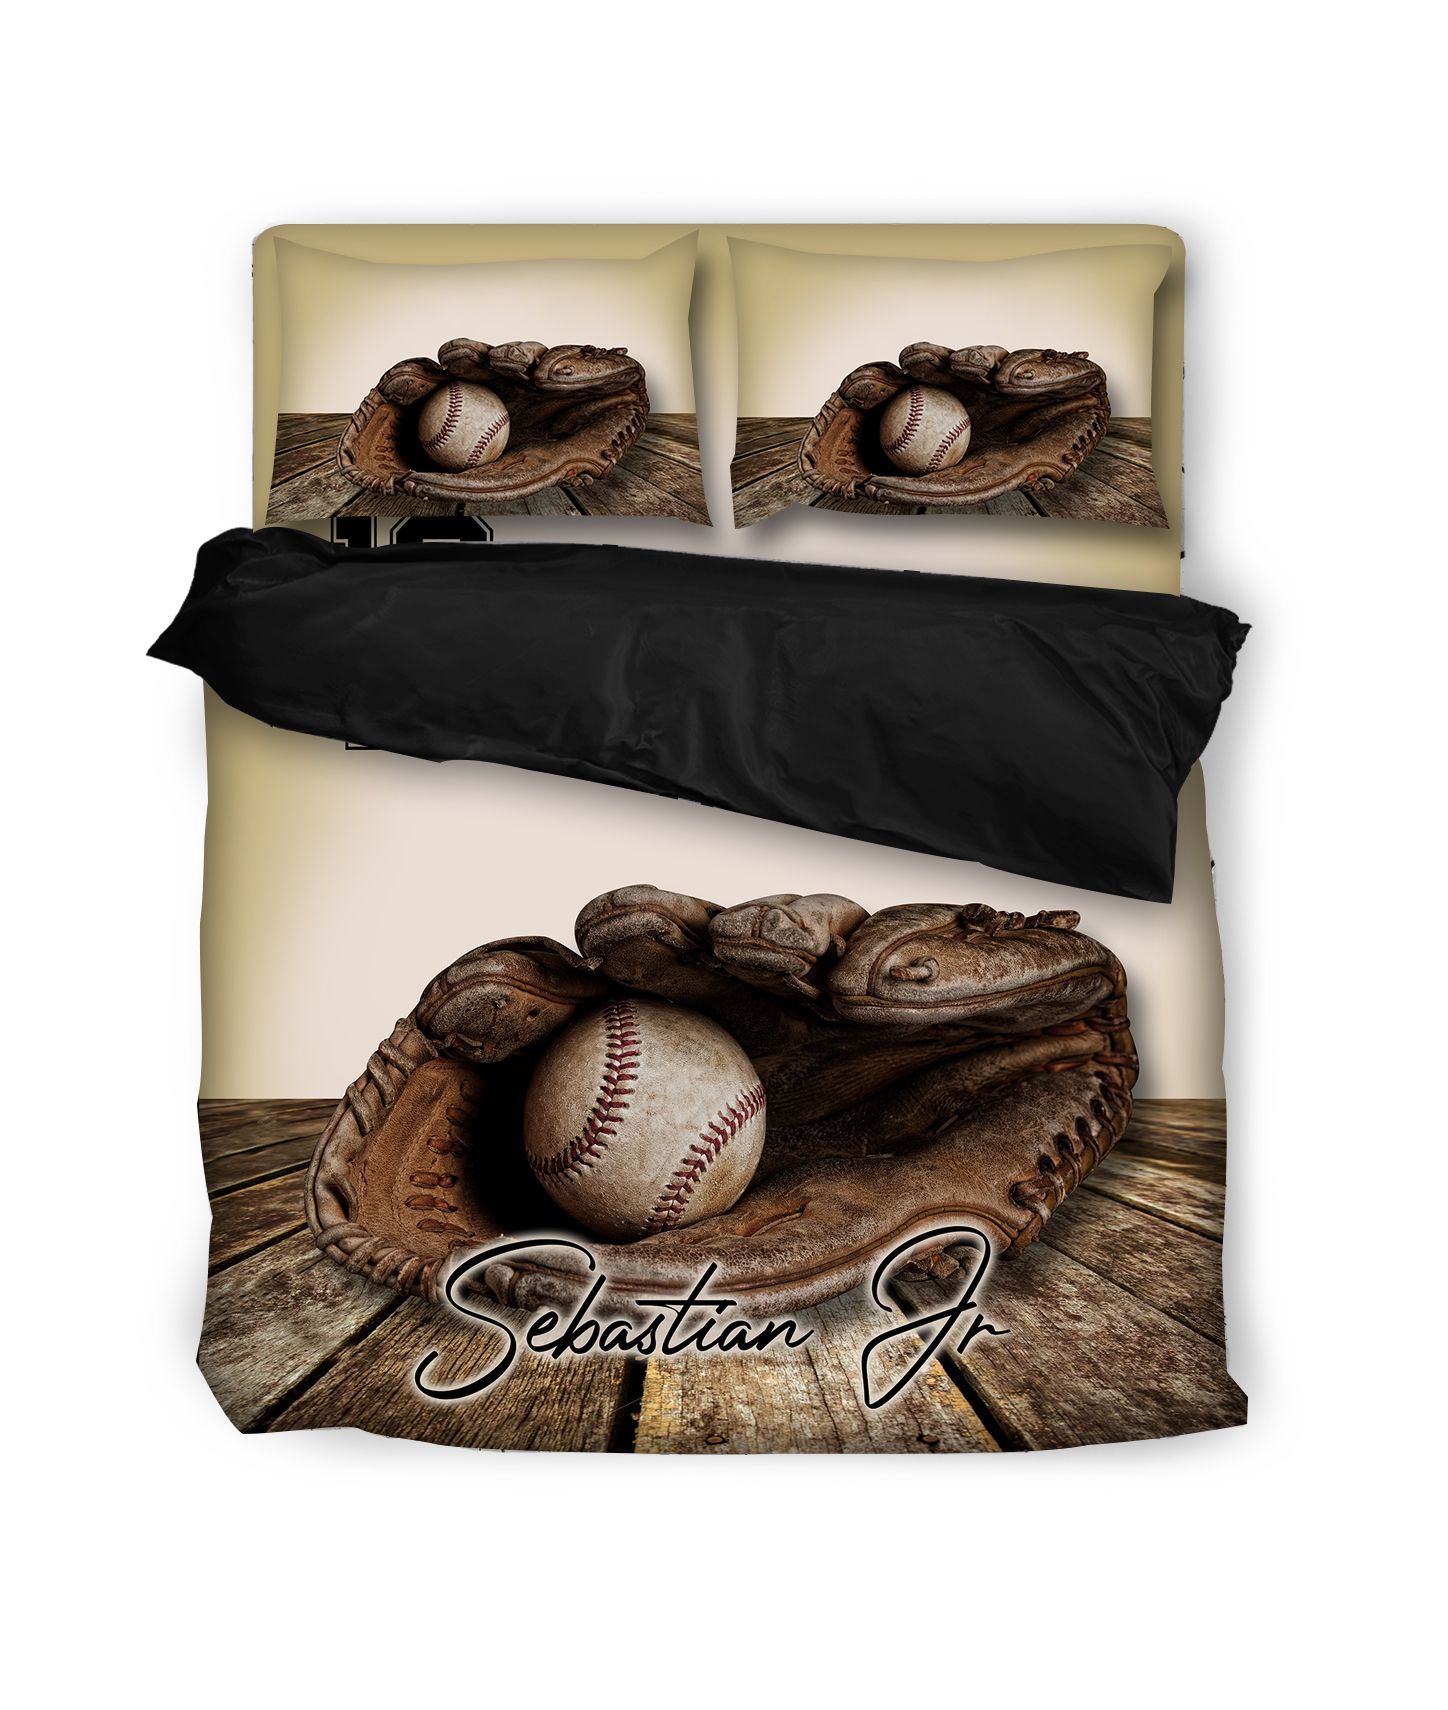 Personalized Vintage Baseball Glove And Ball Duvet Cover Bedding Set With Your Name PAN